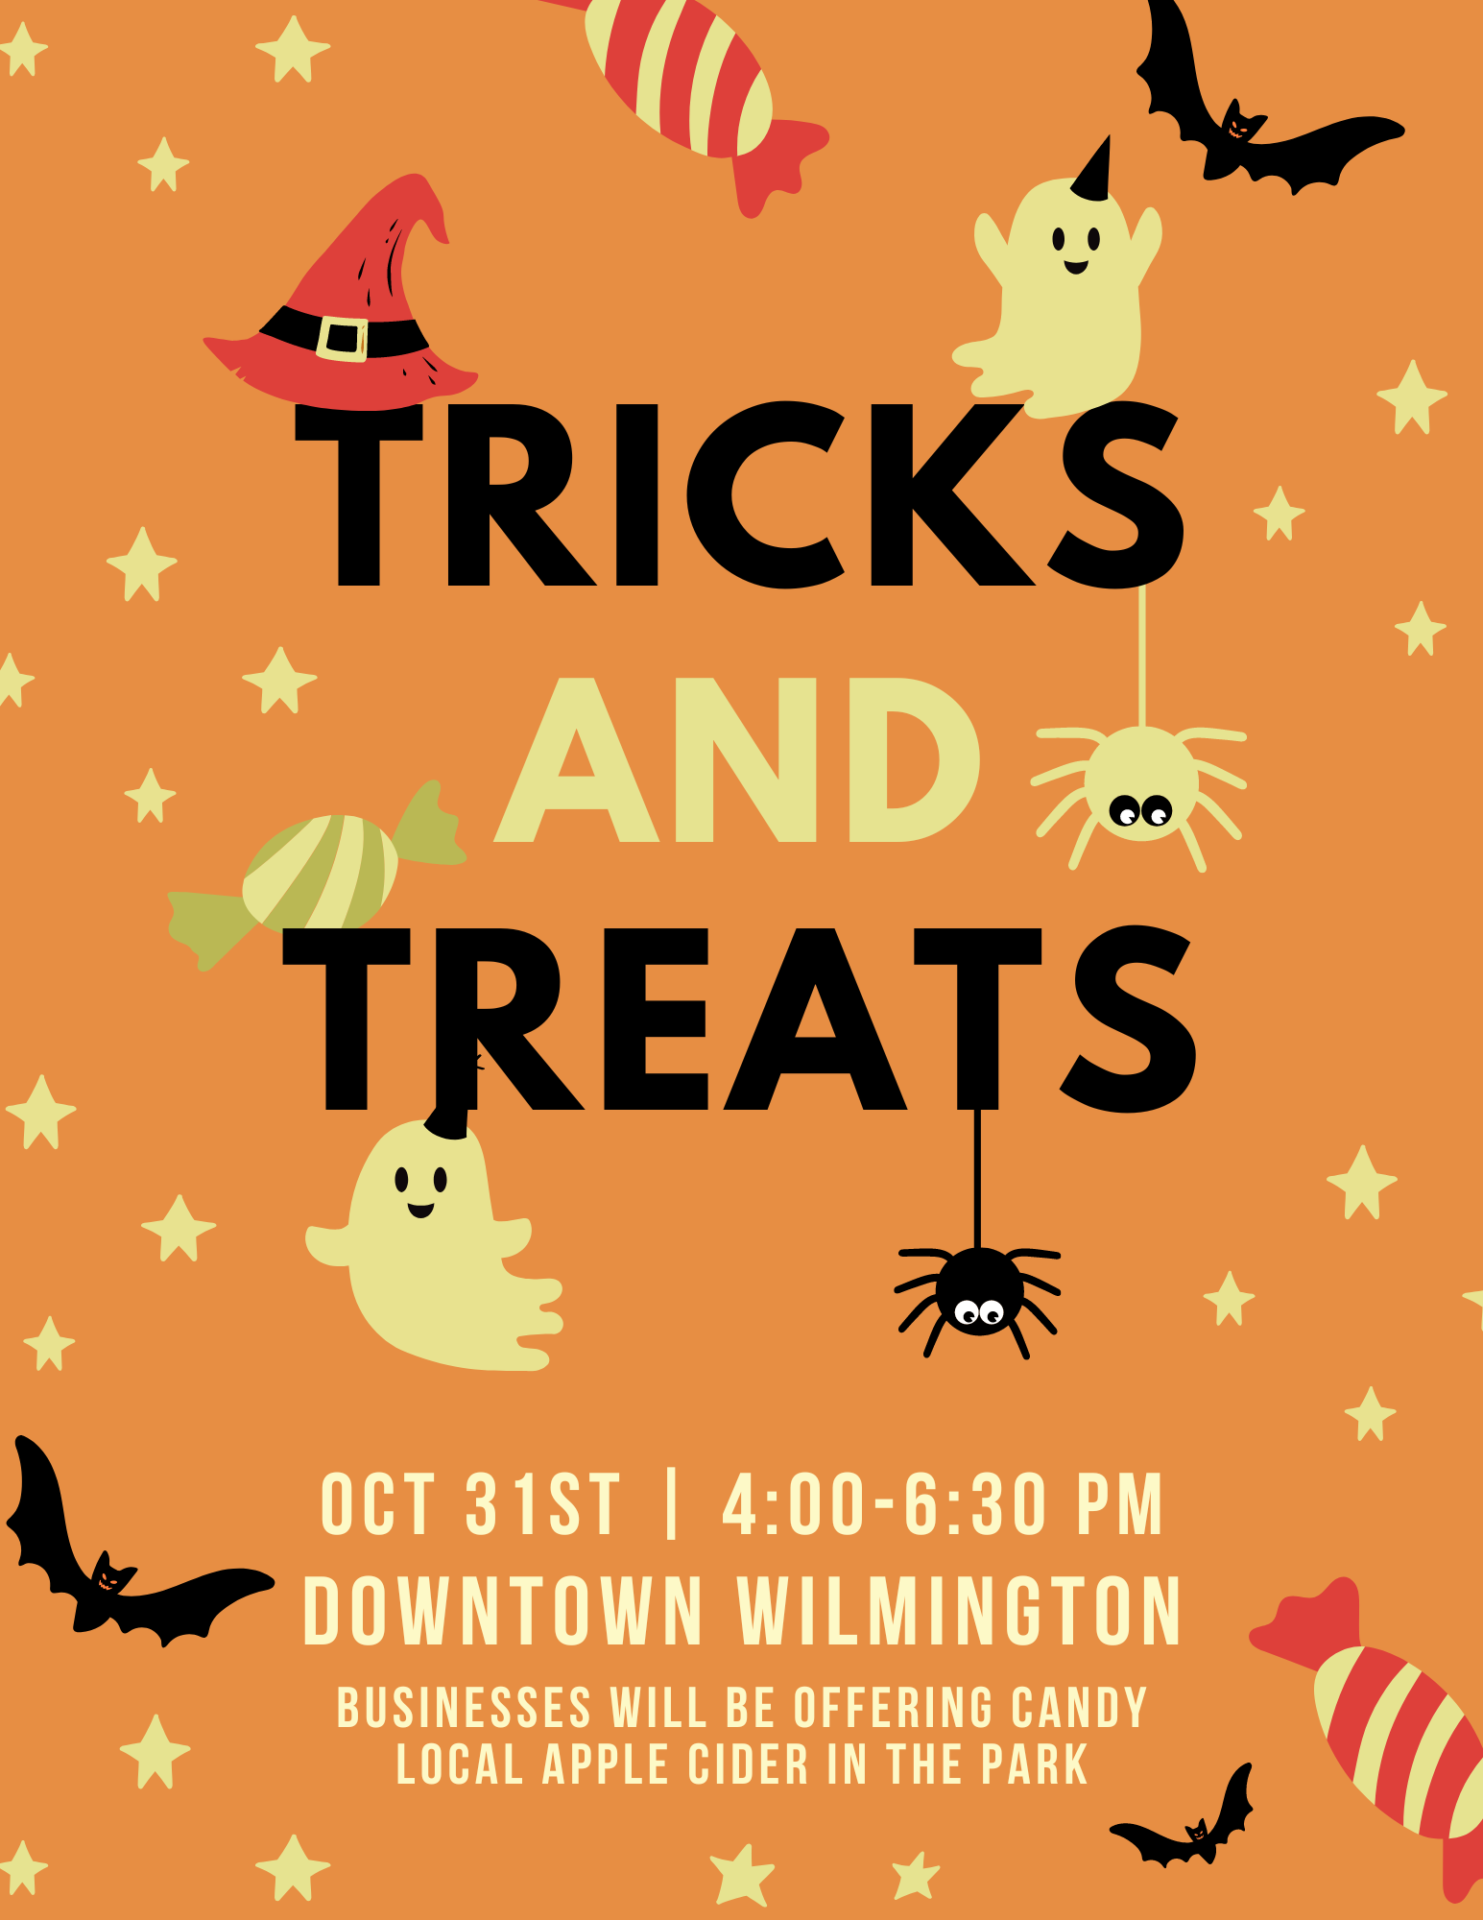 Trick or Treating in Historic Downtown Wilmington SVDV Chamber of